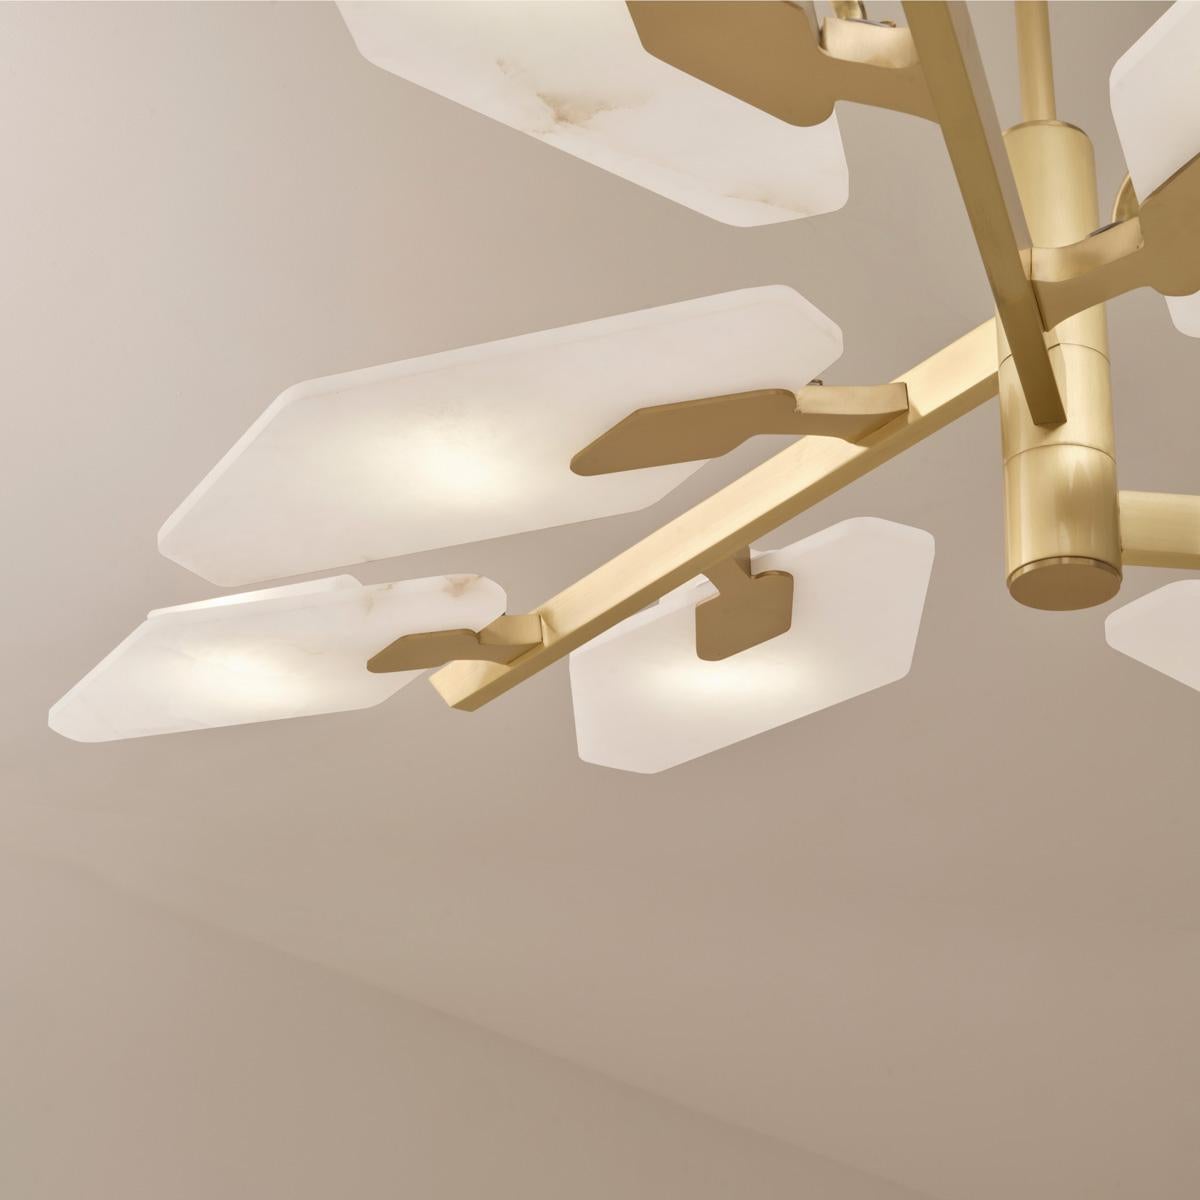 Leaf Ceiling Light by Gaspare Asaro-Satin Brass Finish For Sale 4